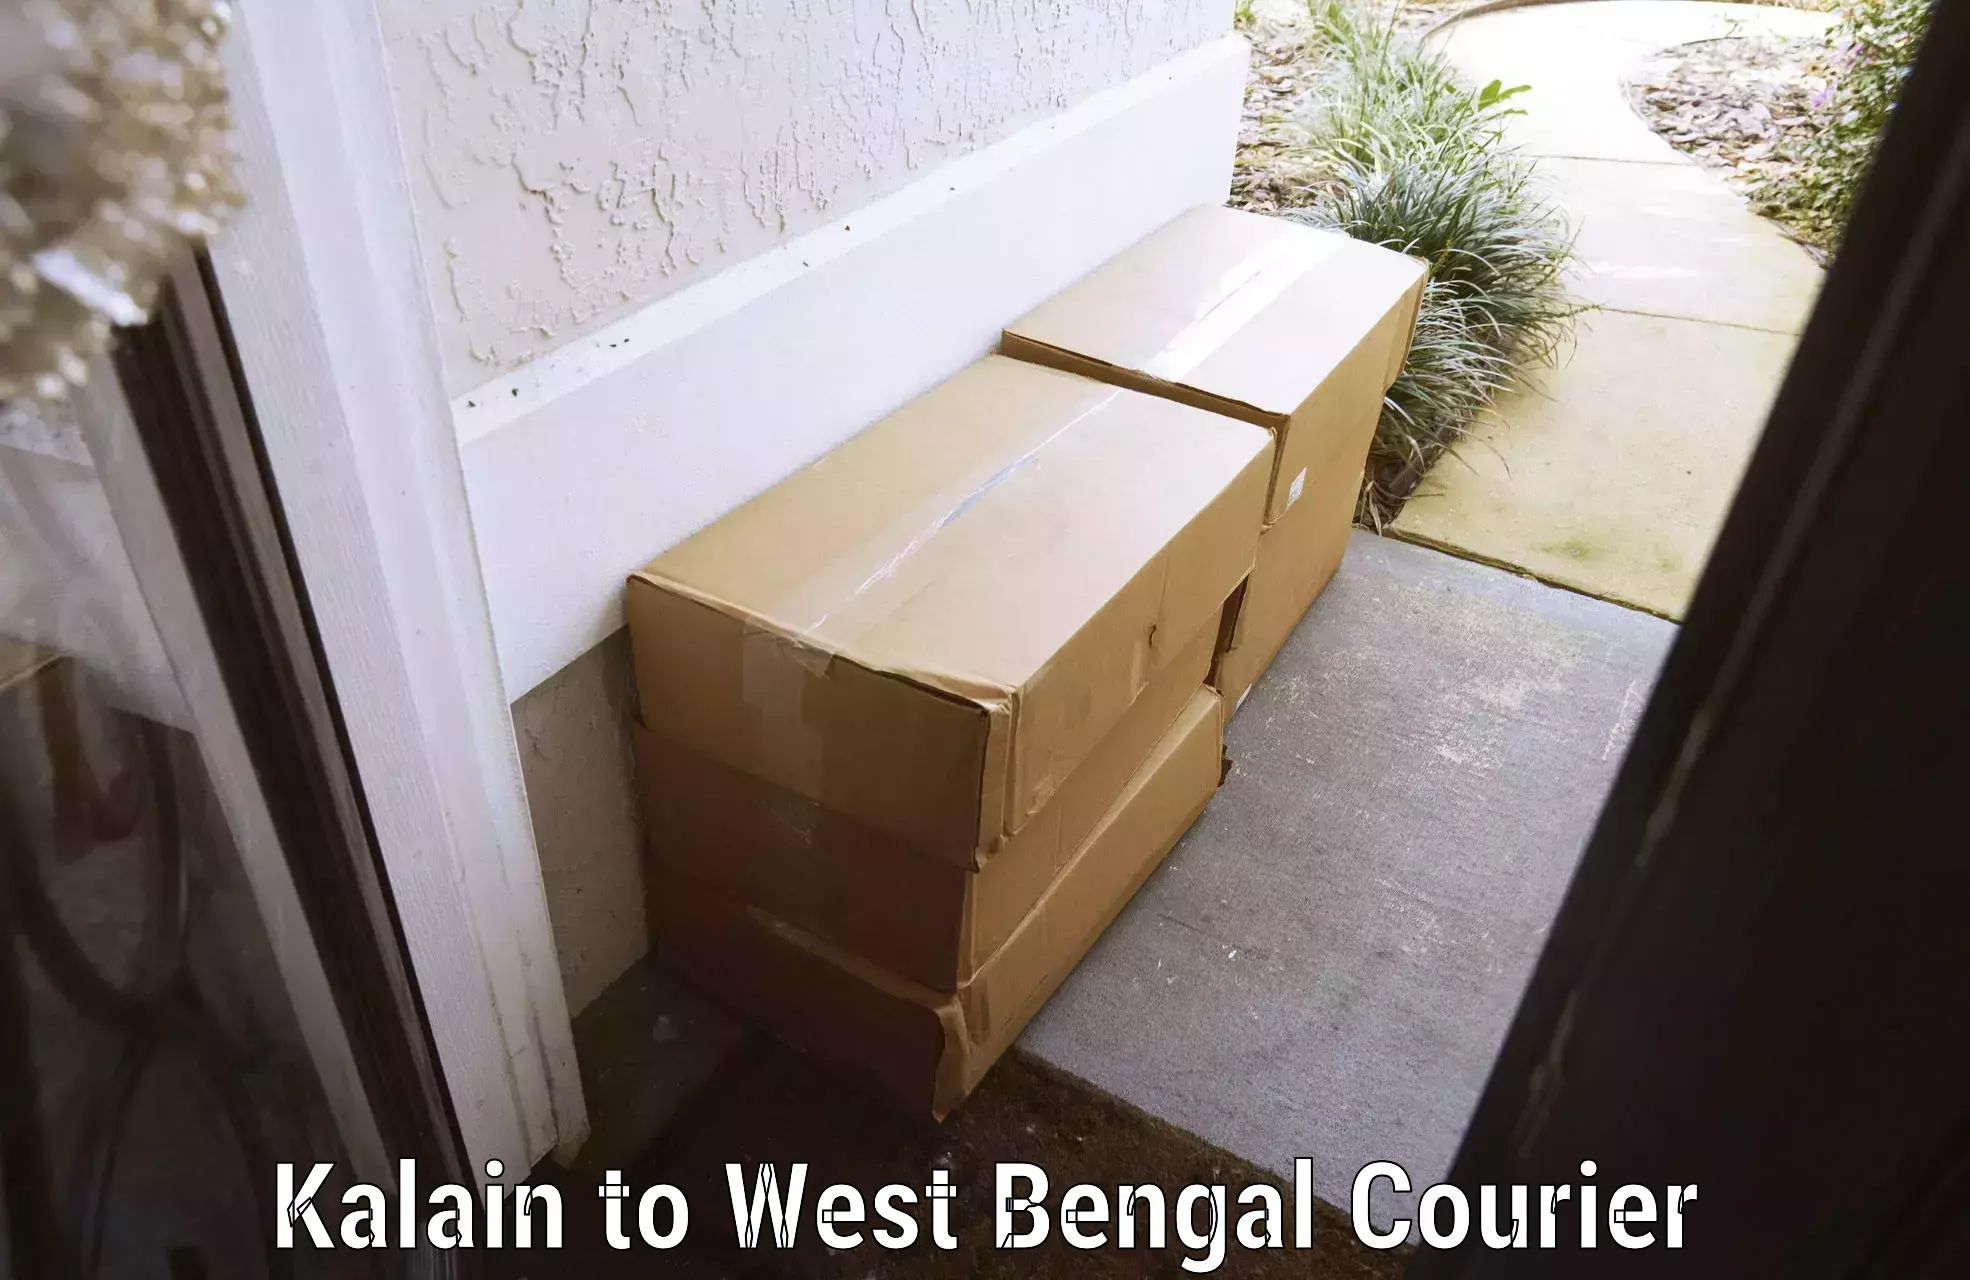 Personal effects shipping Kalain to West Bengal